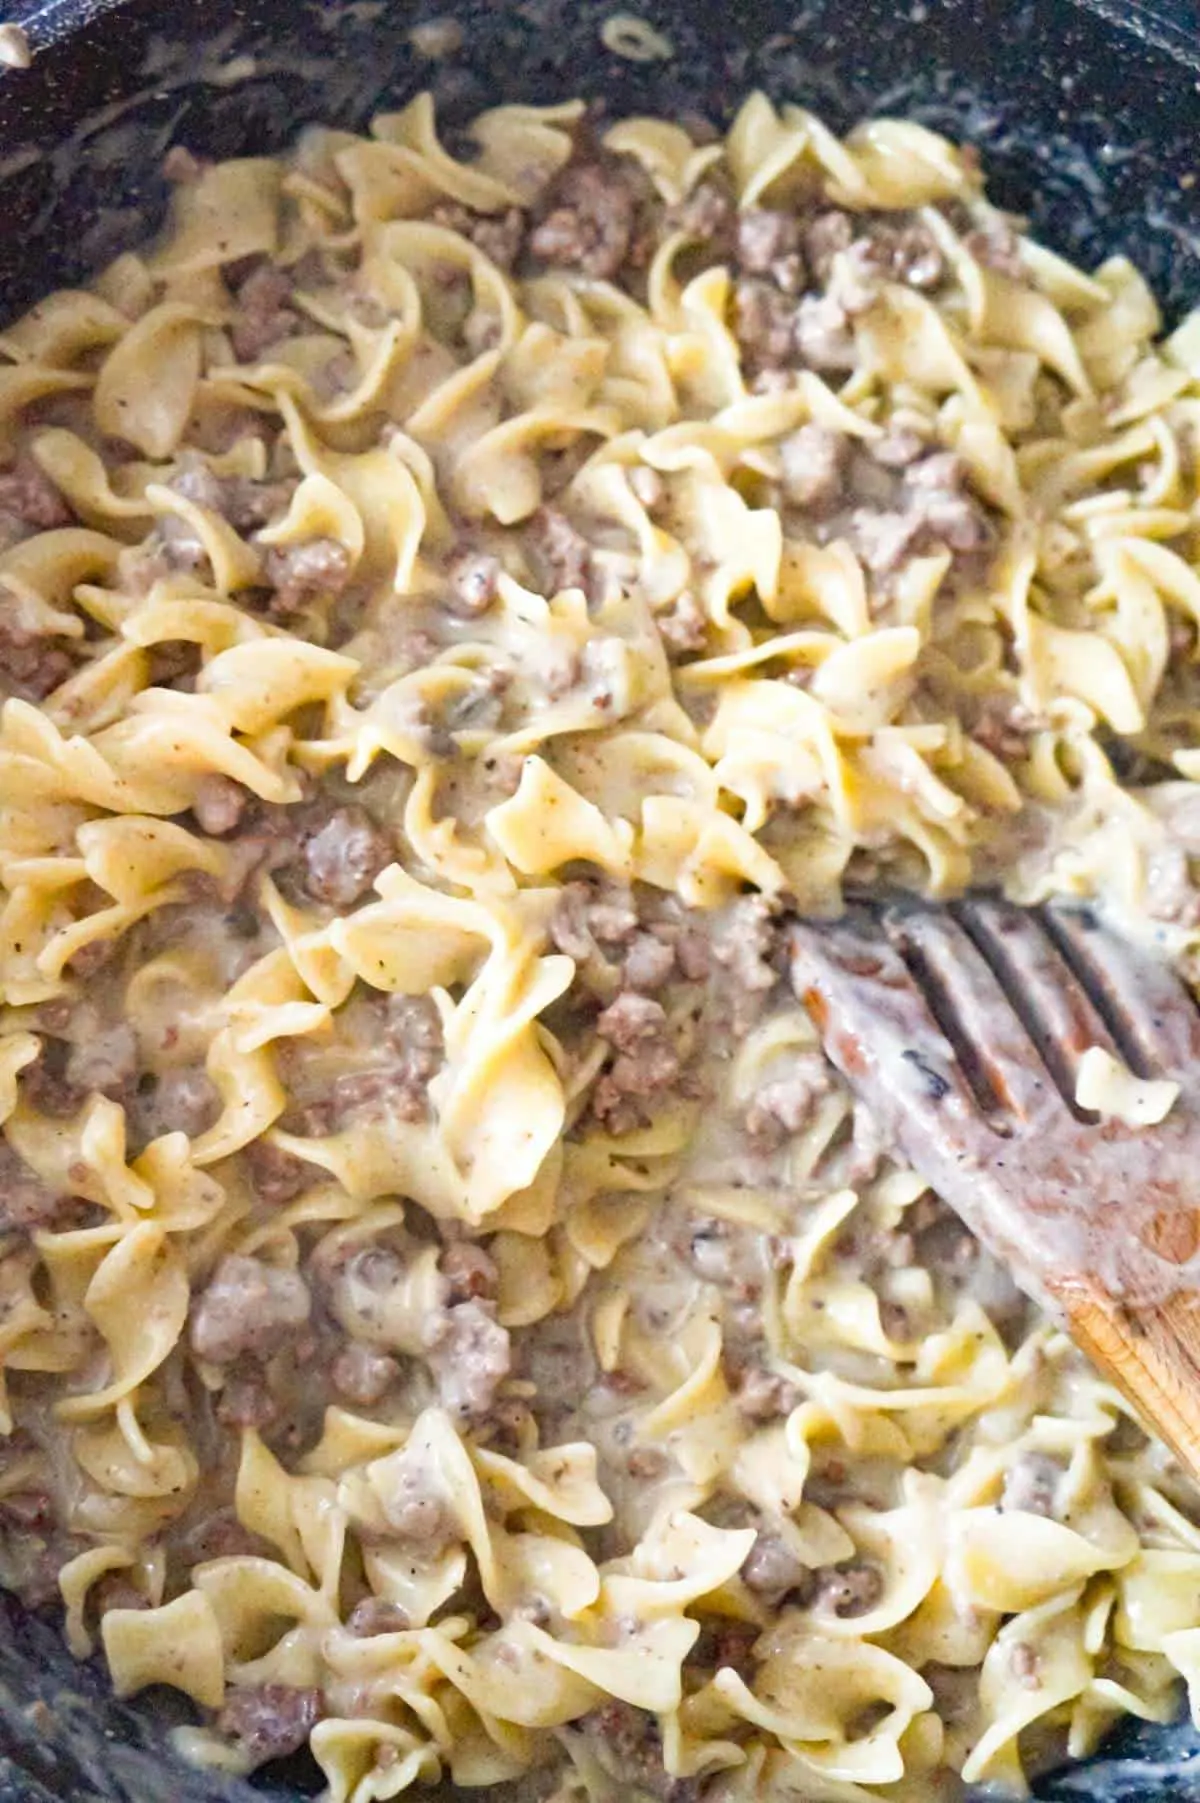 ground beef and egg noodles coated in cream of mushroom soup